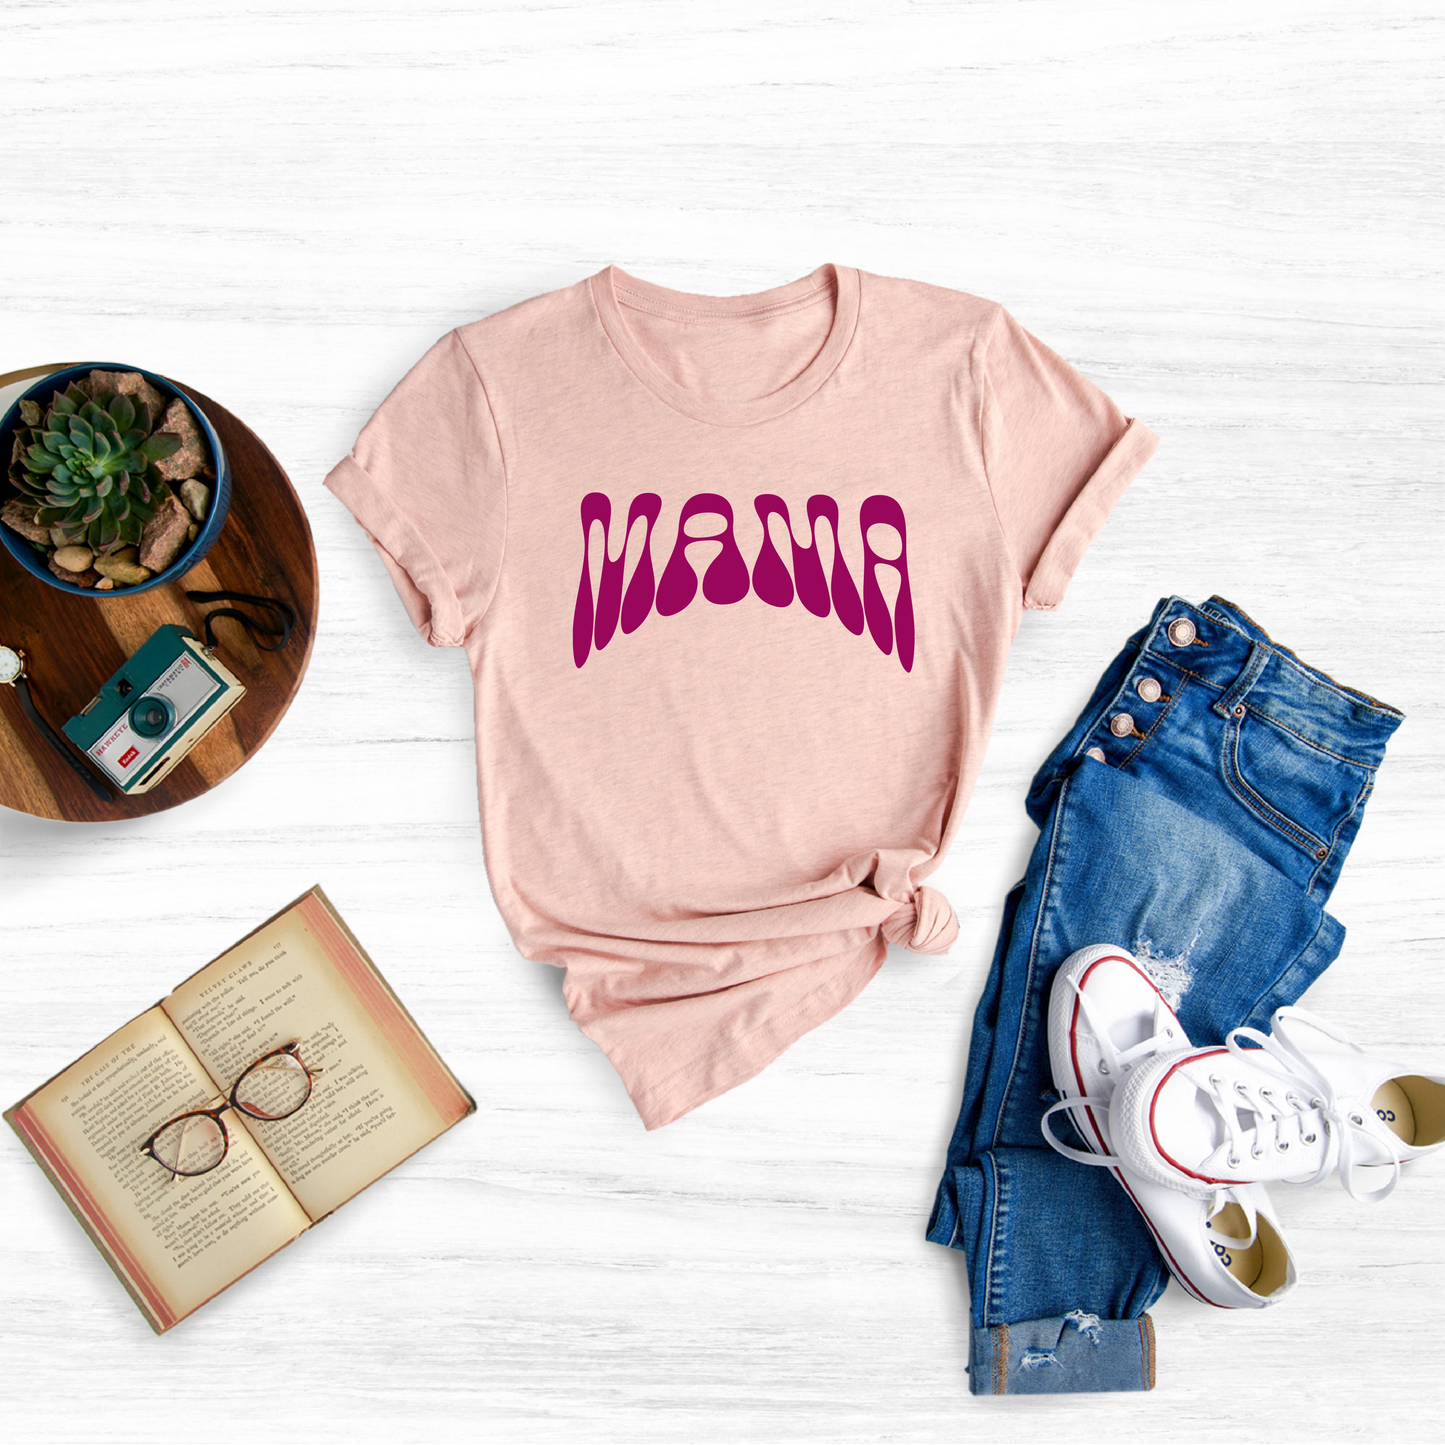 A heart-warming Valentine's Day shirt for moms featuring a loving message and "Best Mom Ever" text.